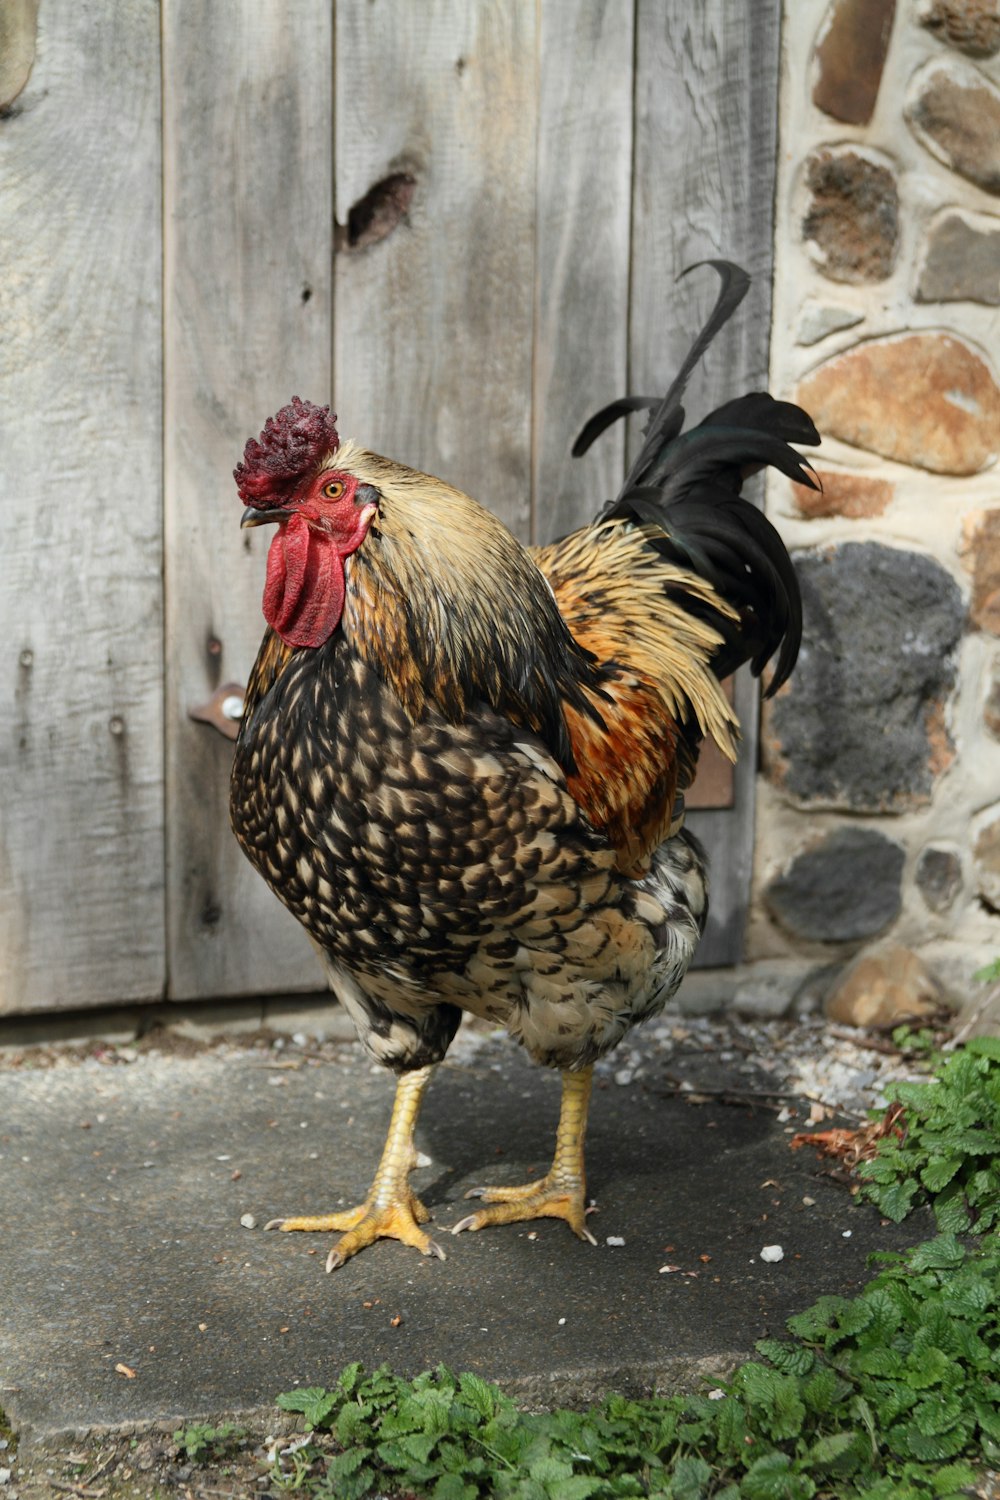 brown and black rooster on gray concrete floor